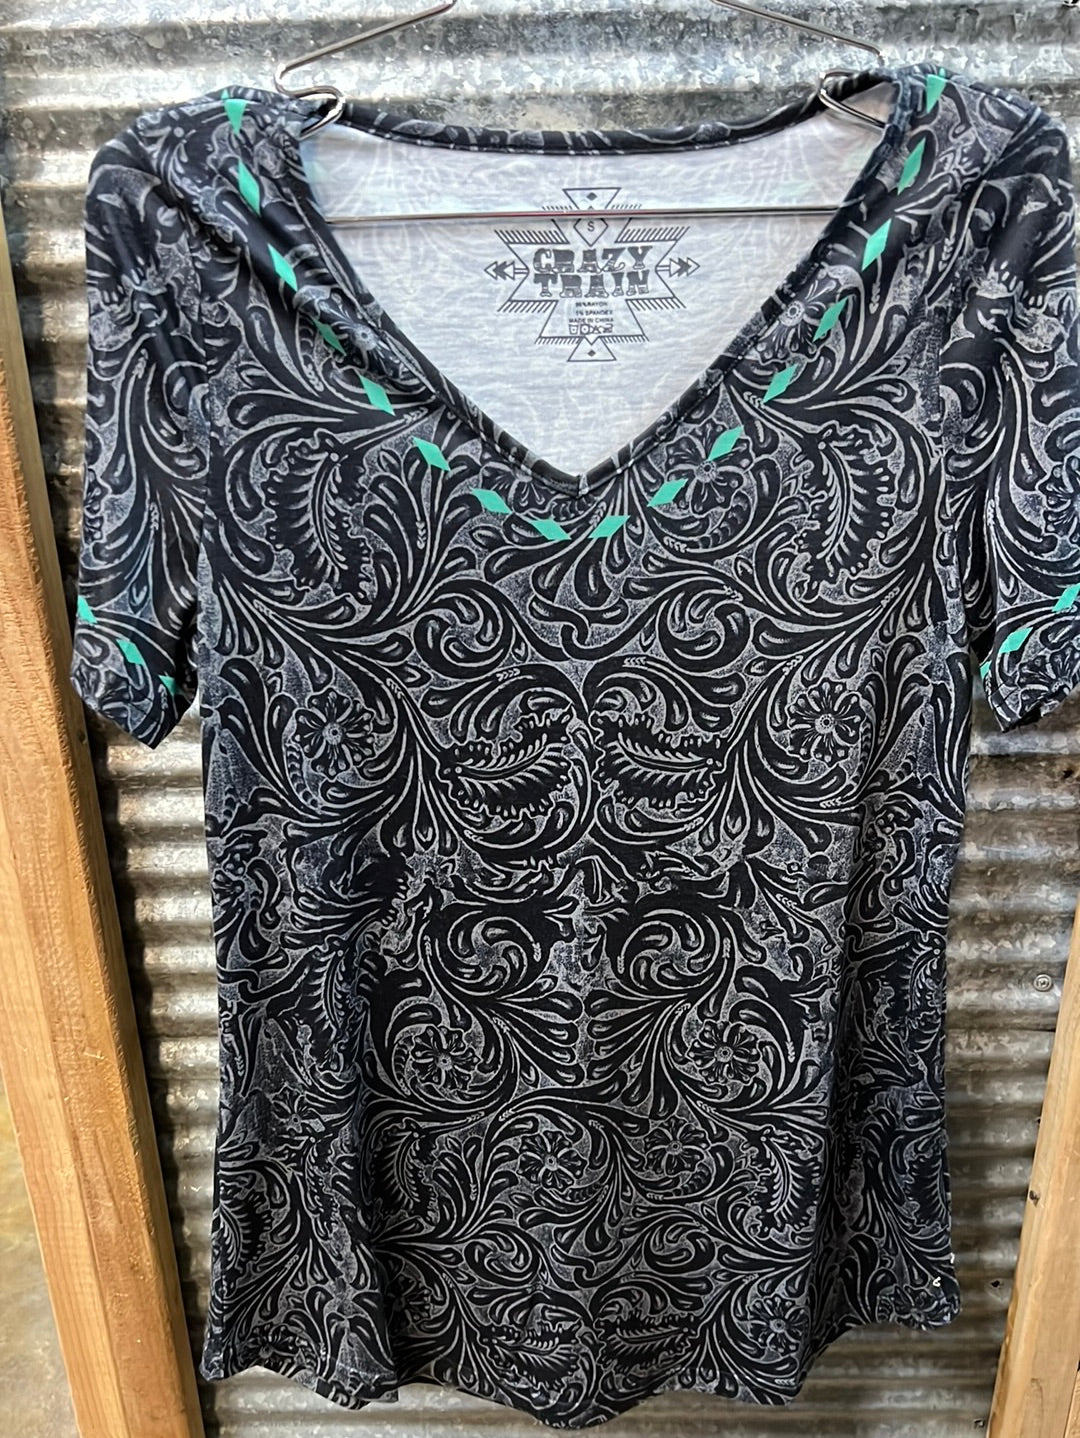 Crazy Train Black Patterned Tee